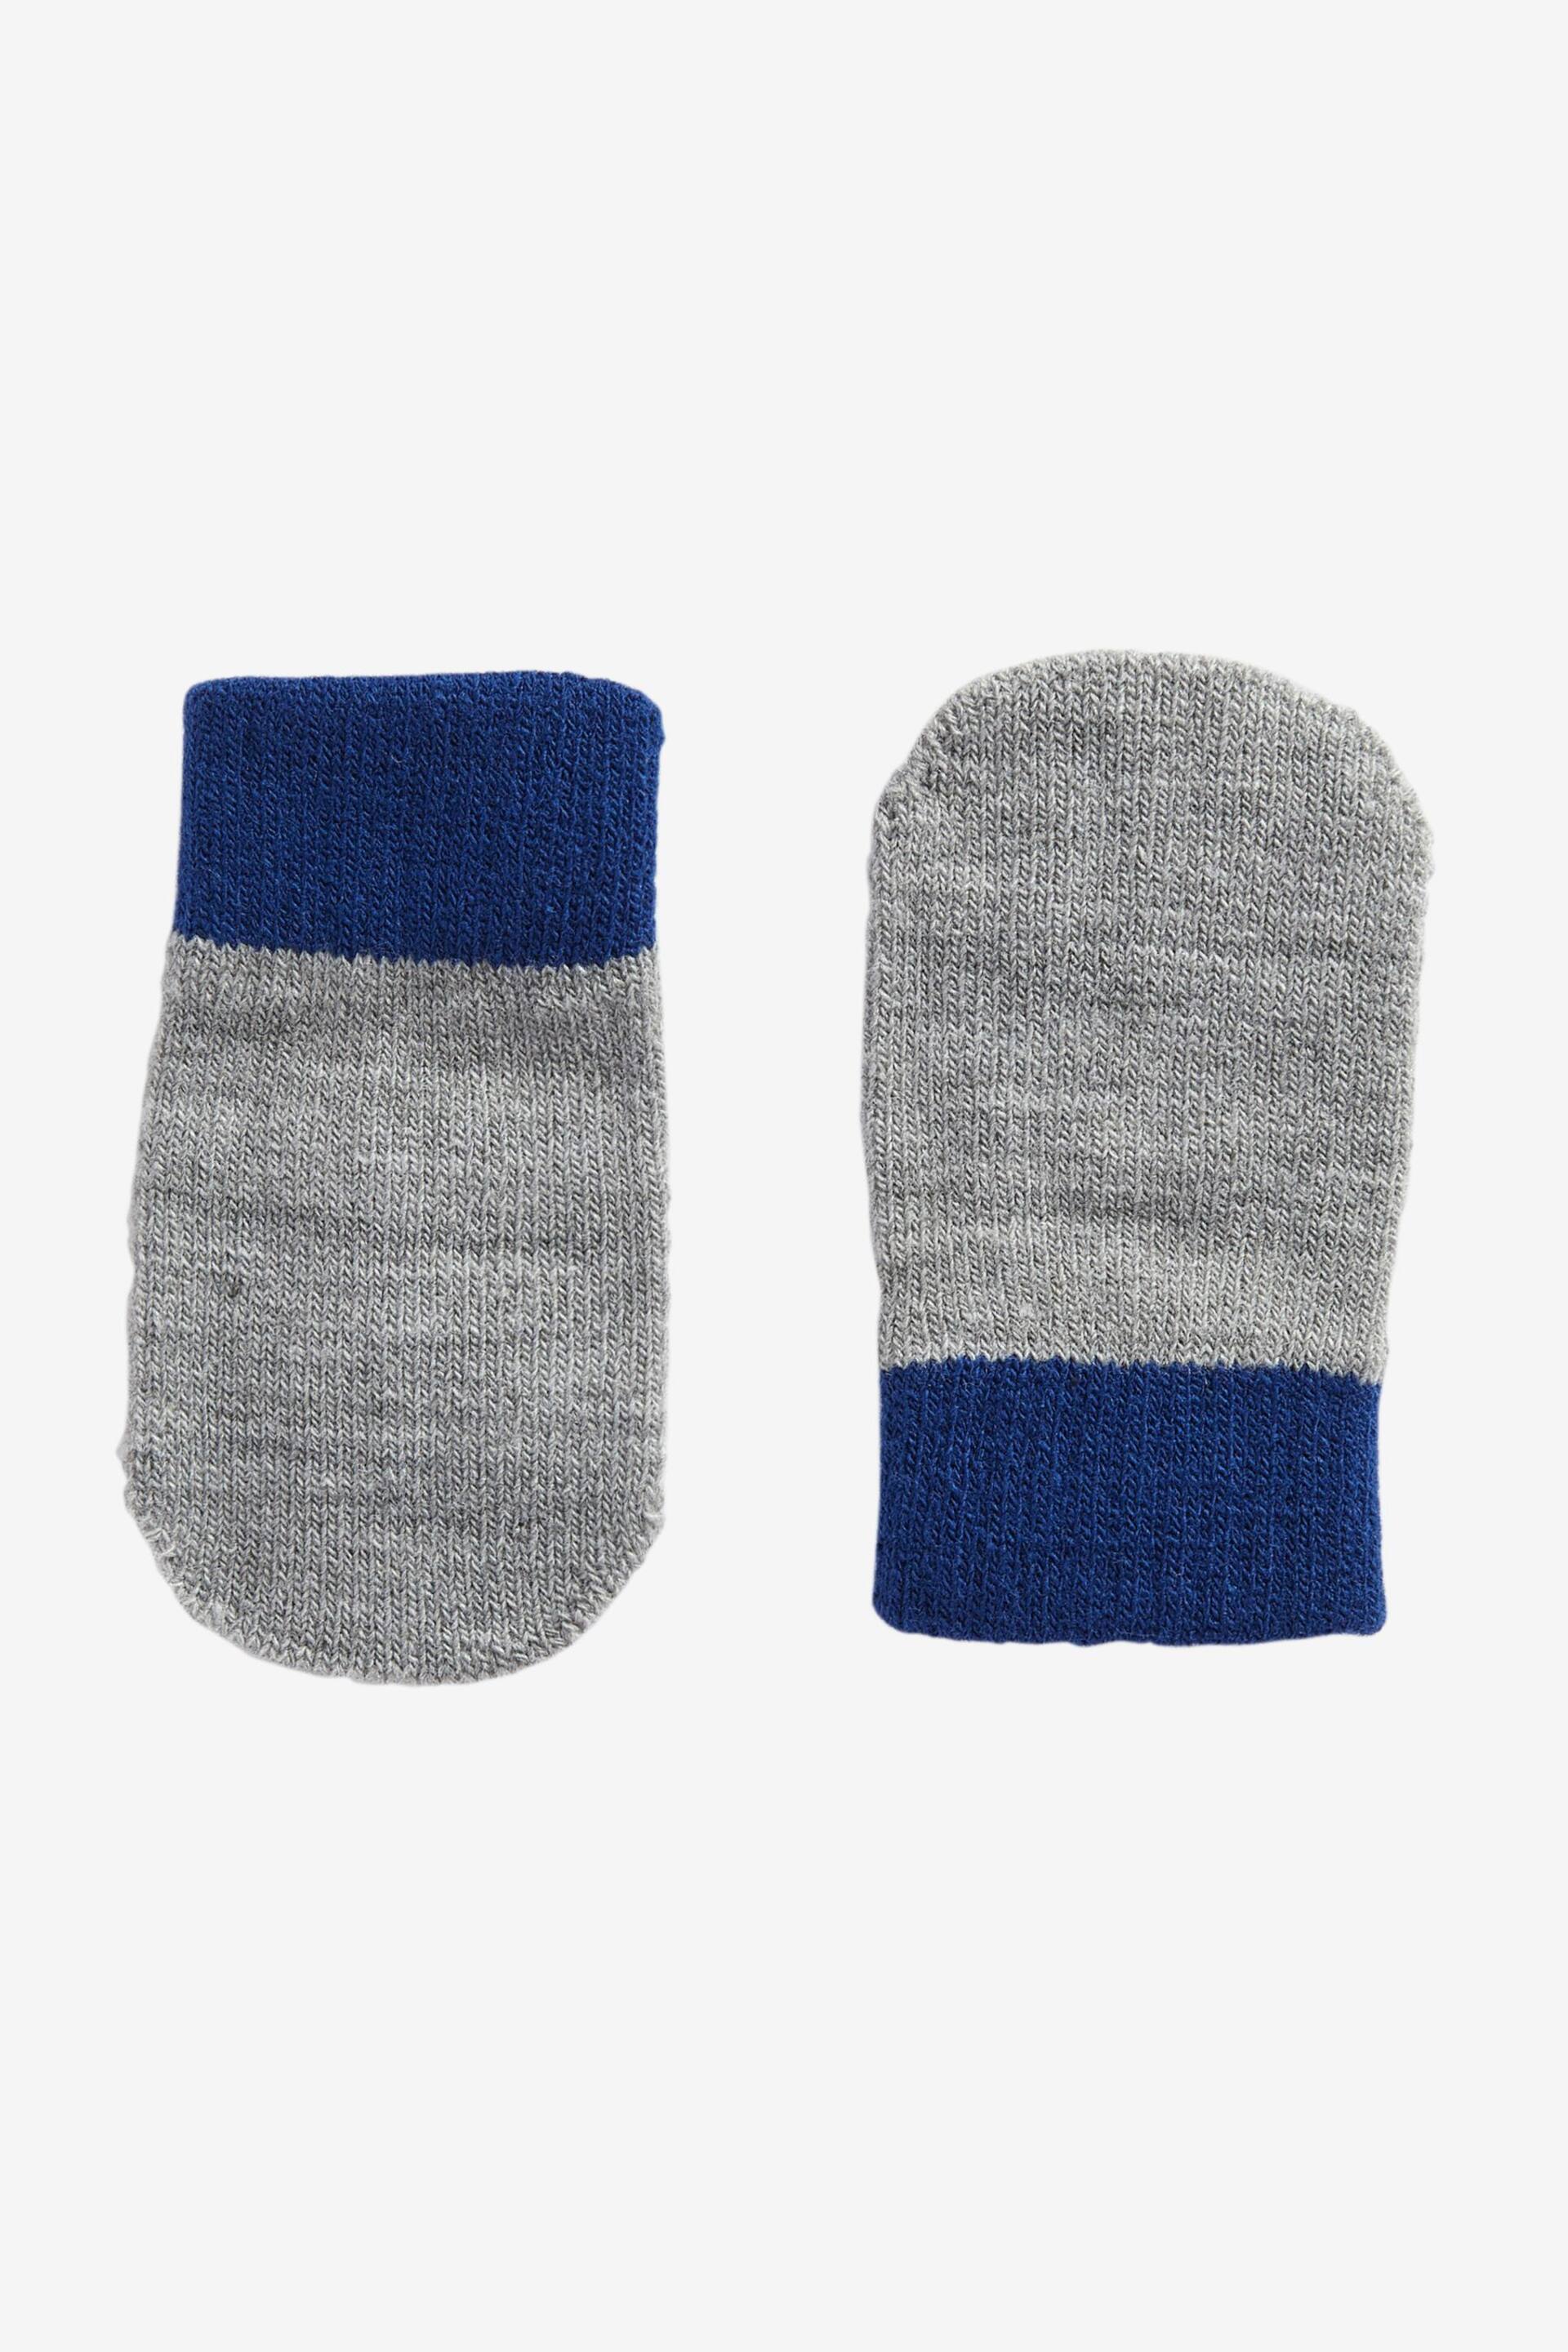 Navy/Blue/Grey Mittens 3 Pack (3mths-6yrs) - Image 4 of 4